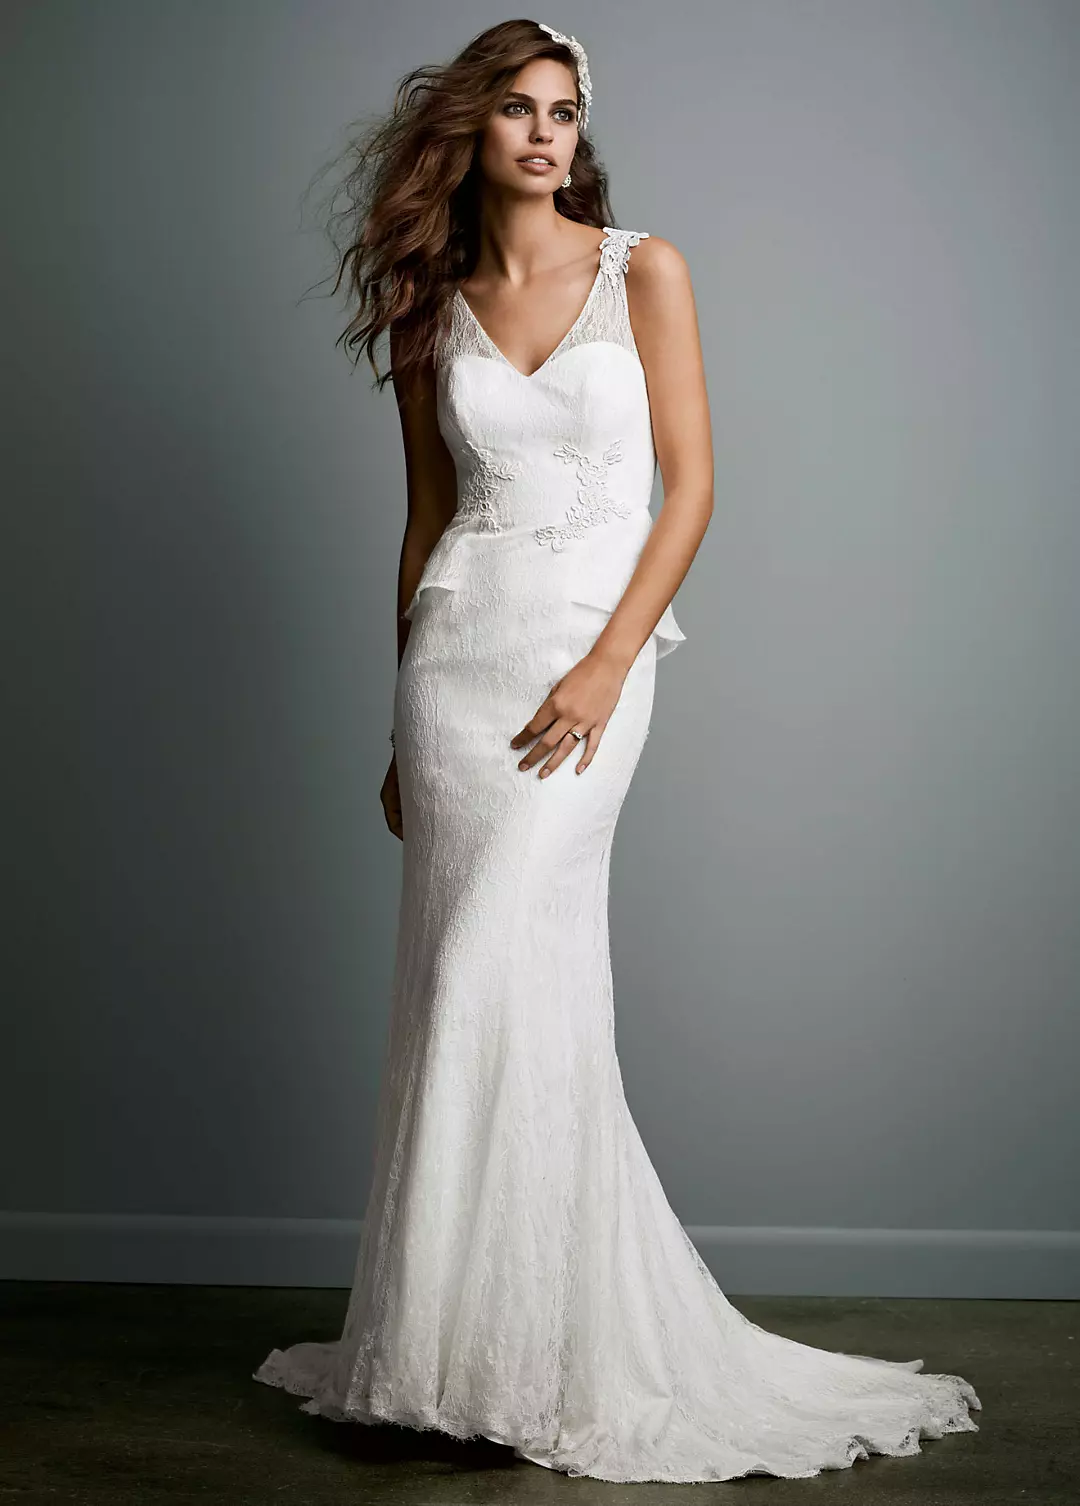 Sheath Lace Gown with V-Neck and Illusion Back Image